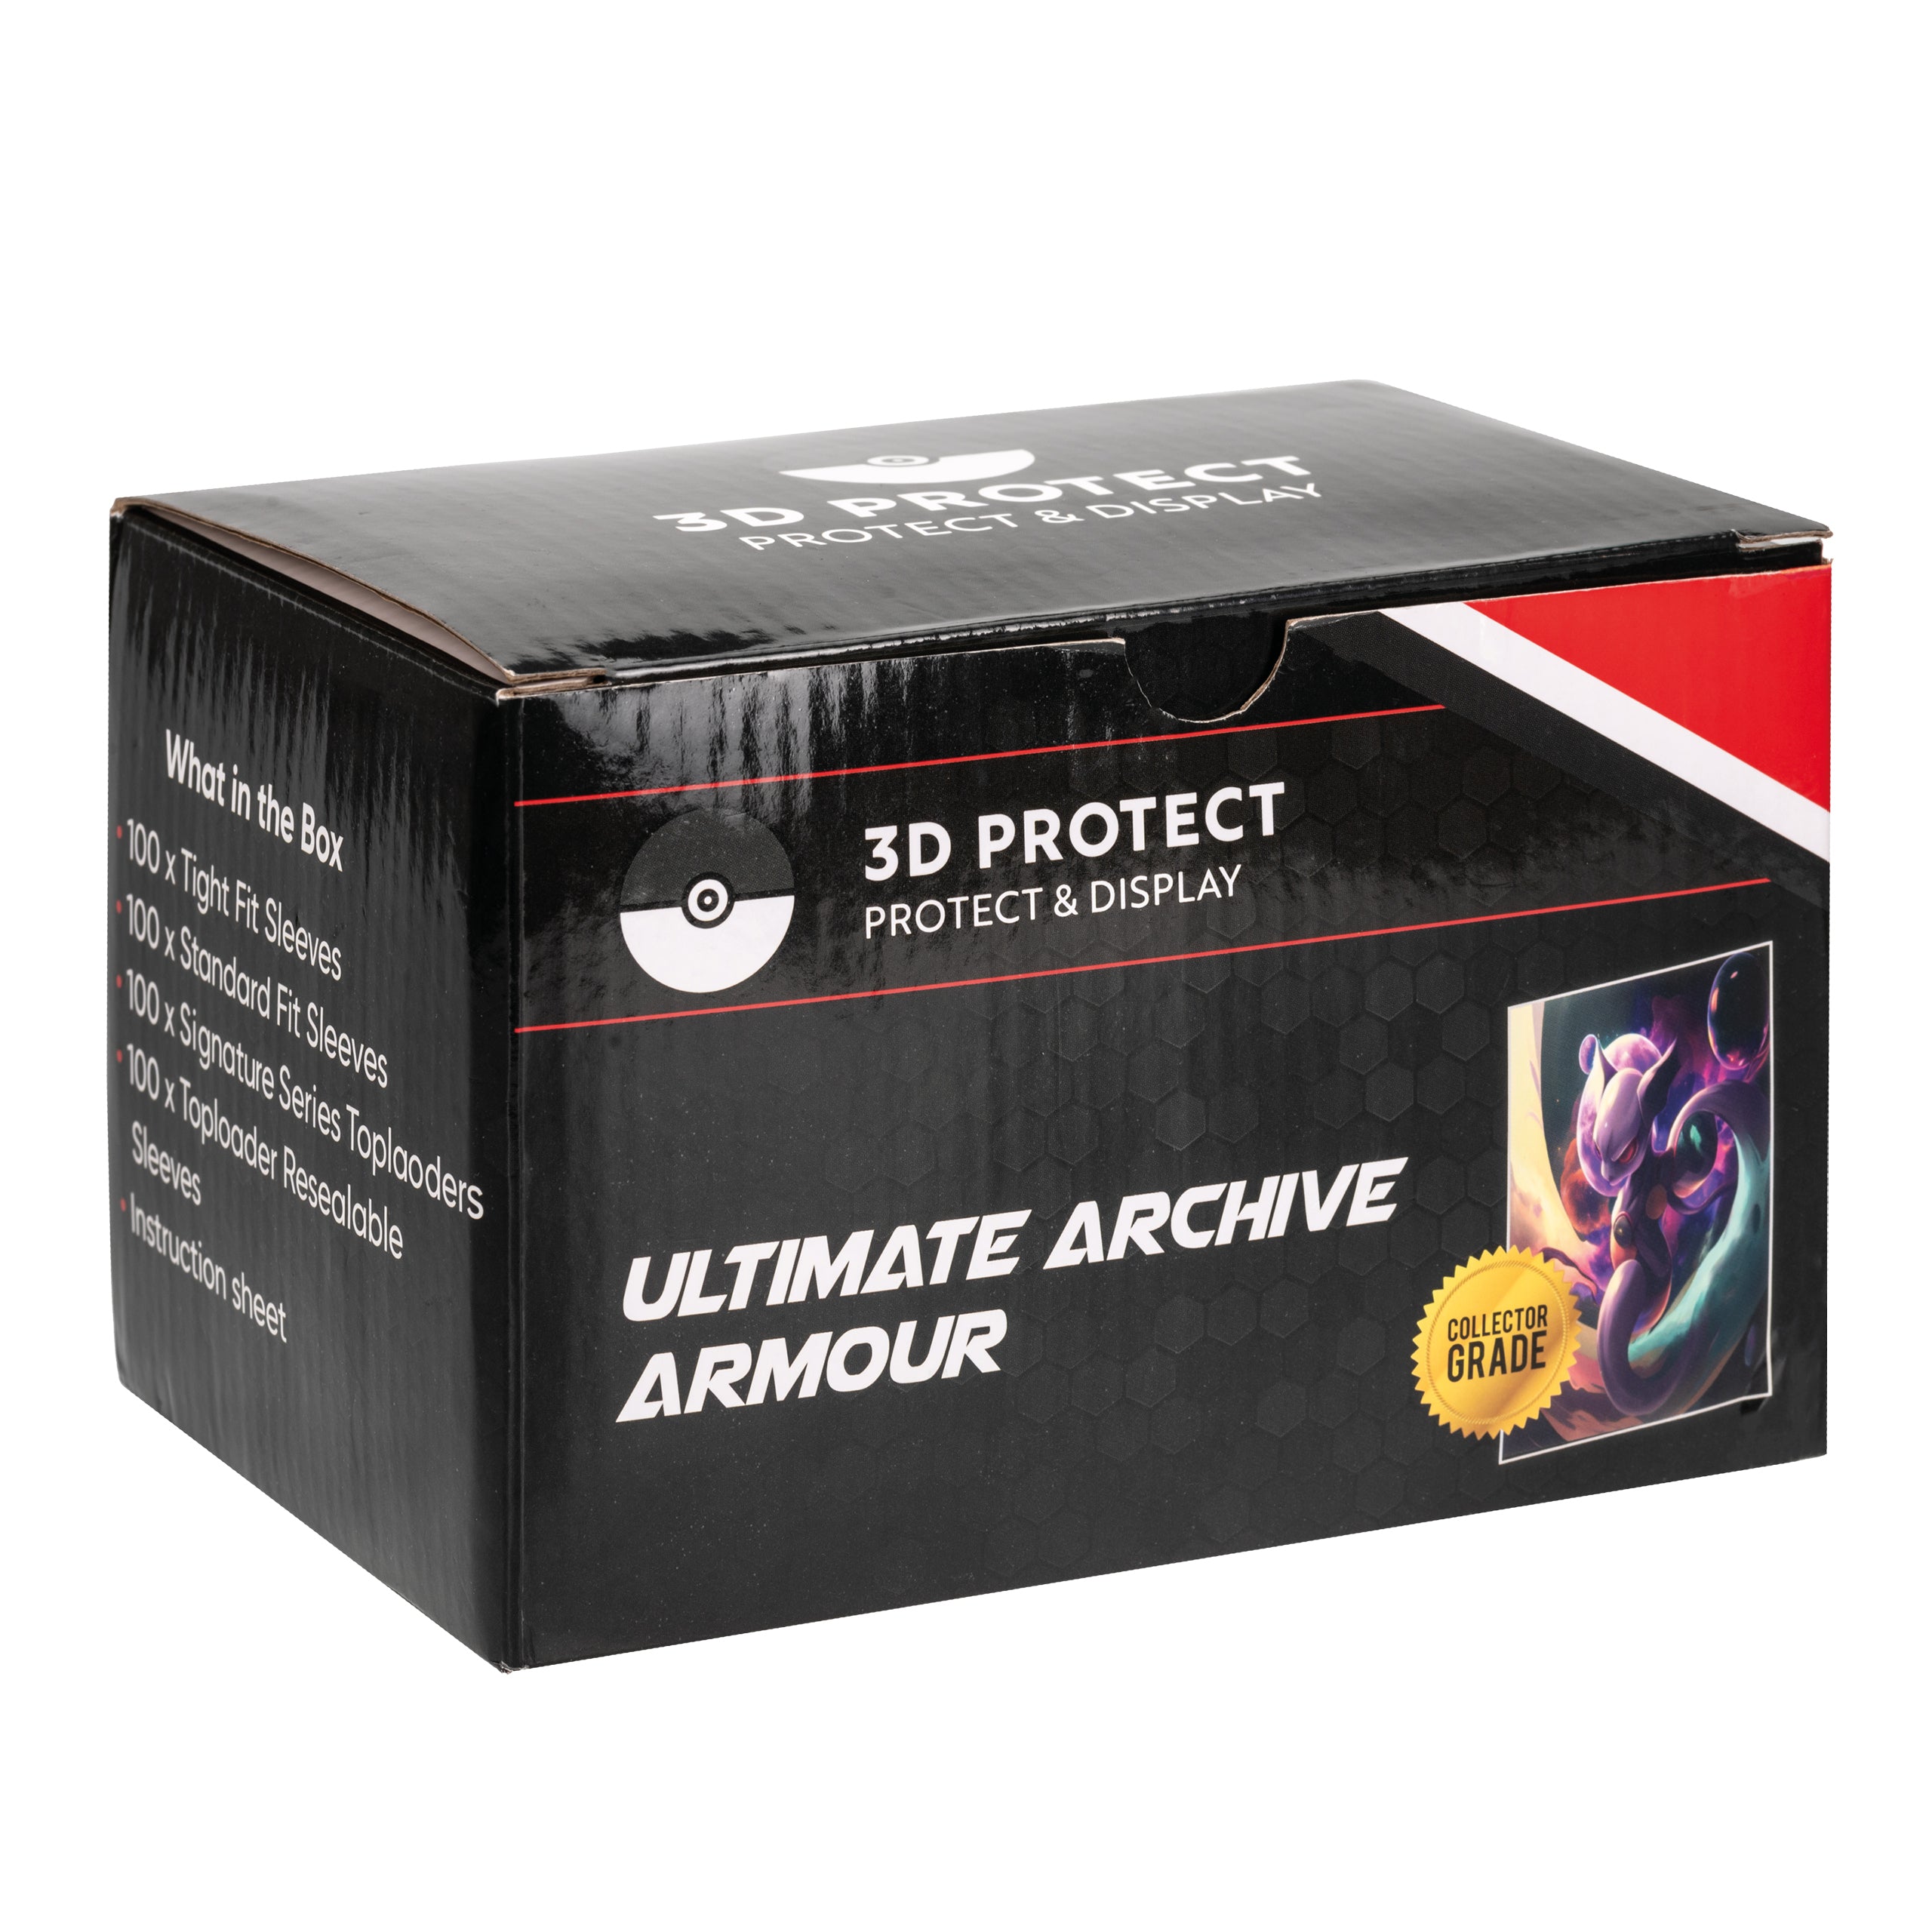 Ultimate Archive Armour 4-in-1 Card Protector Set